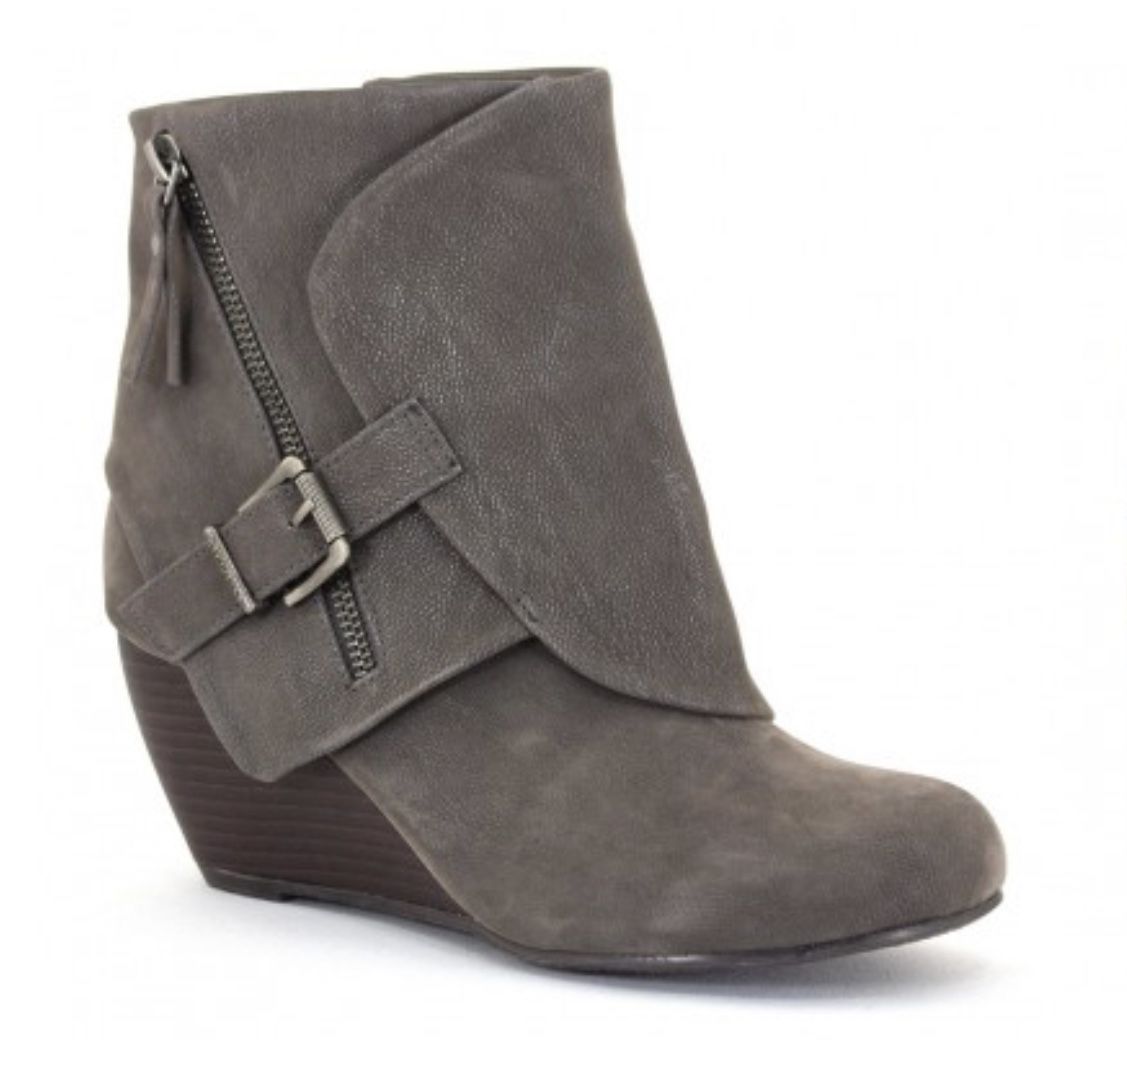 New Womens Grey Booties Size 10 / Boots / Shoes 